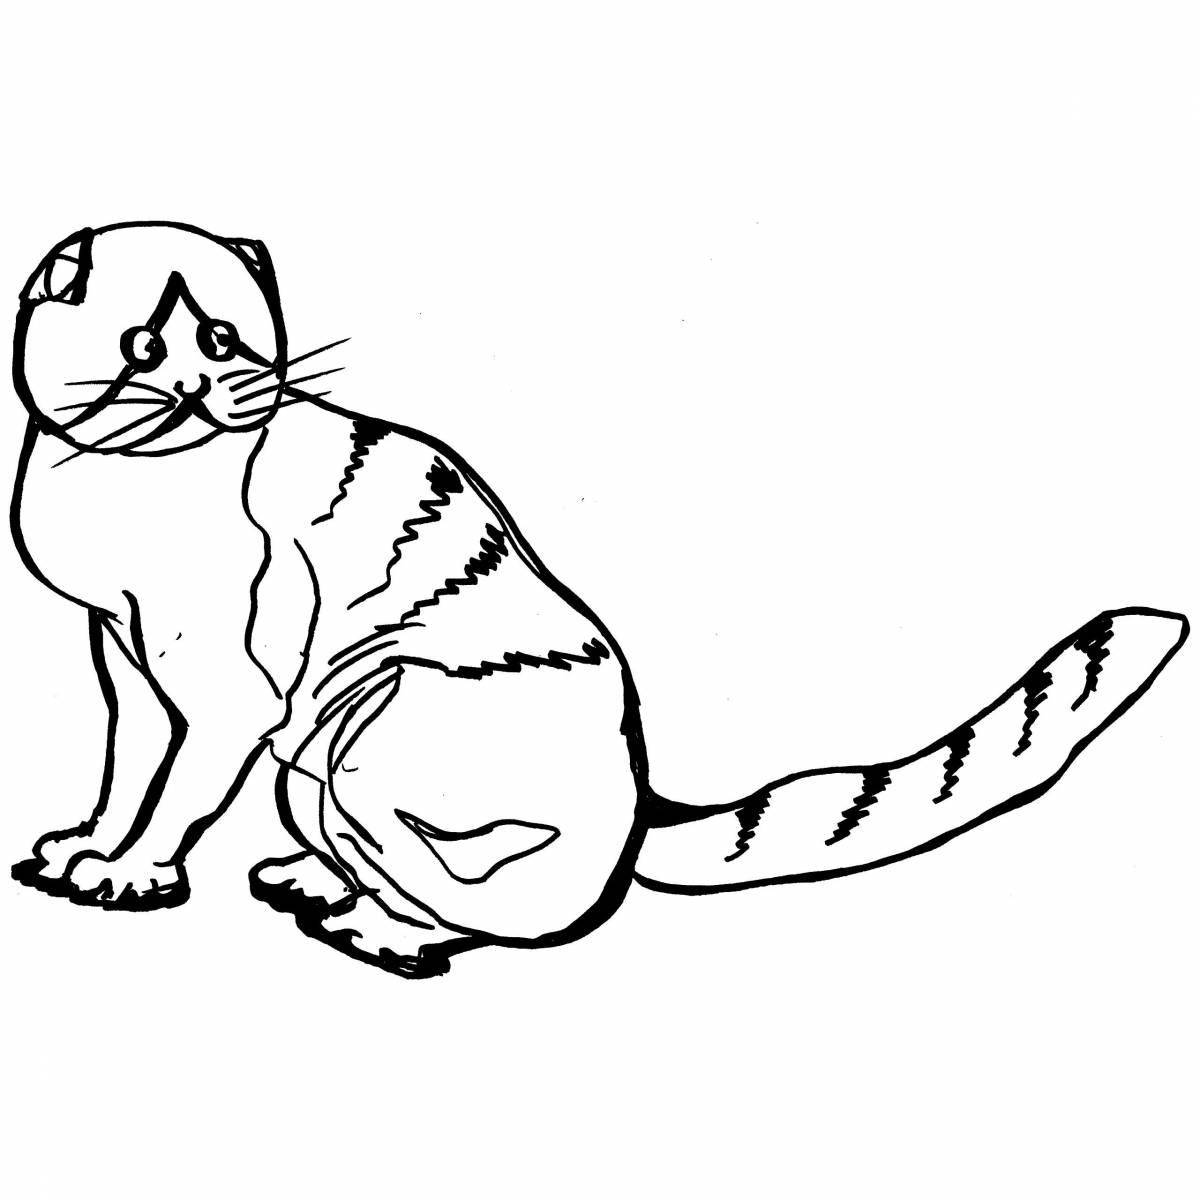 Colorful scottish fold kittens coloring book